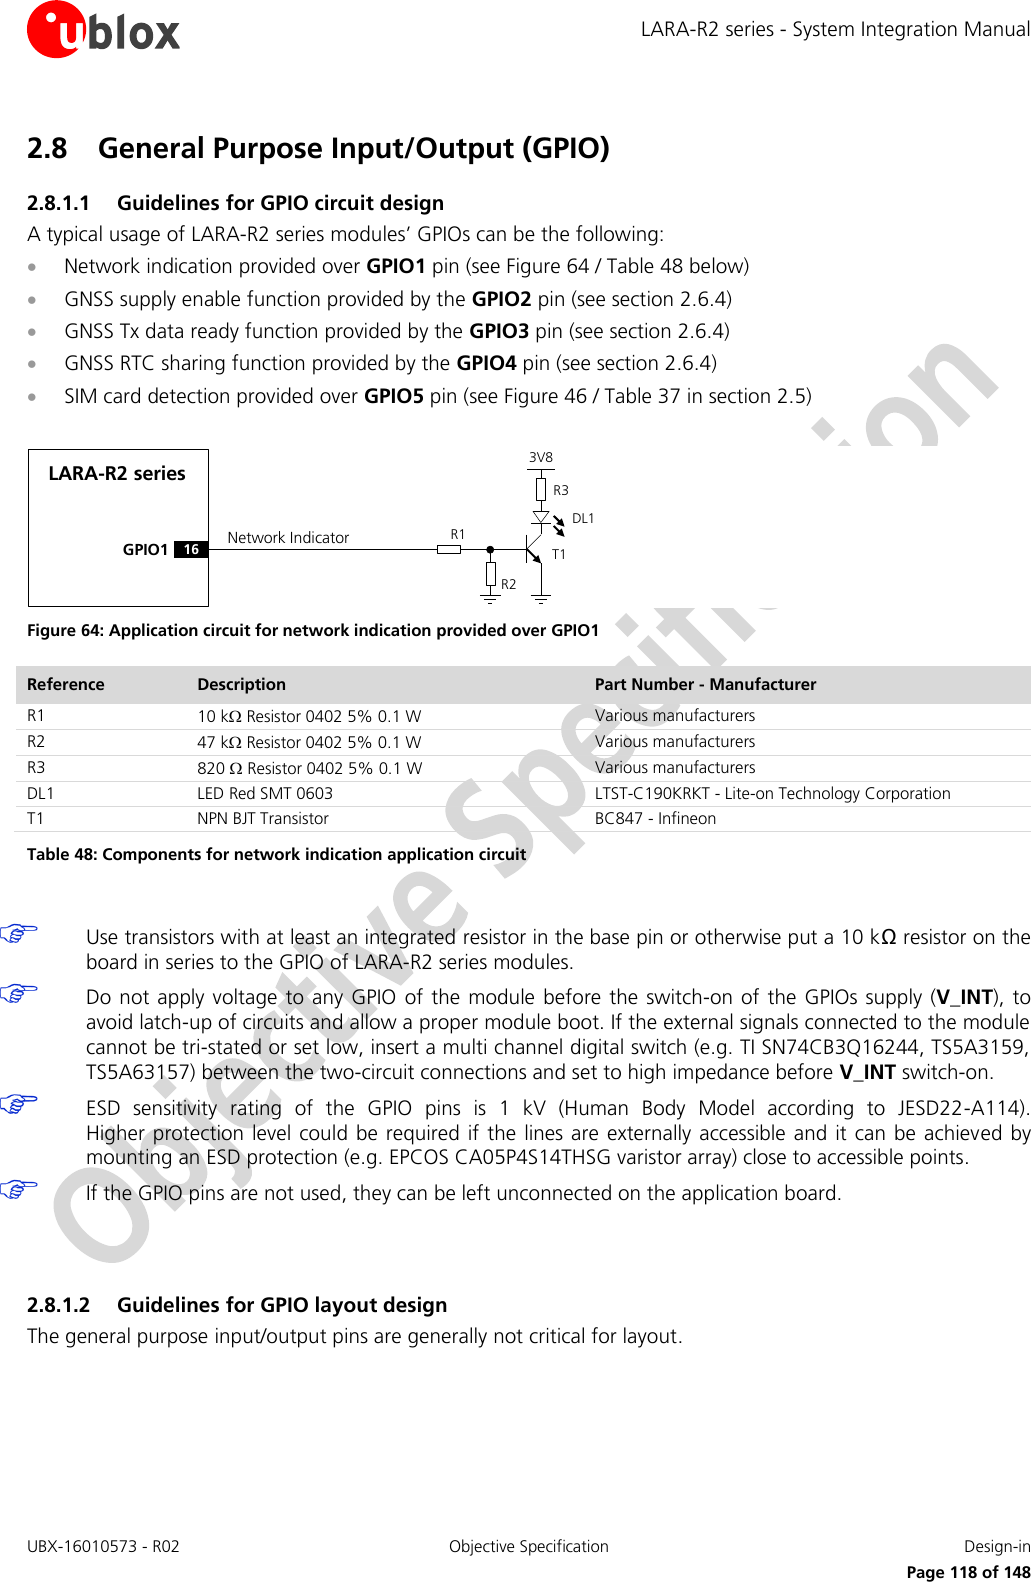 LARA-R2 series - System Integration Manual UBX-16010573 - R02  Objective Specification  Design-in     Page 118 of 148 2.8 General Purpose Input/Output (GPIO) 2.8.1.1 Guidelines for GPIO circuit design A typical usage of LARA-R2 series modules’ GPIOs can be the following:  Network indication provided over GPIO1 pin (see Figure 64 / Table 48 below)  GNSS supply enable function provided by the GPIO2 pin (see section 2.6.4)  GNSS Tx data ready function provided by the GPIO3 pin (see section 2.6.4)  GNSS RTC sharing function provided by the GPIO4 pin (see section 2.6.4)  SIM card detection provided over GPIO5 pin (see Figure 46 / Table 37 in section 2.5)  LARA-R2 seriesGPIO1R1R33V8Network IndicatorR216DL1T1 Figure 64: Application circuit for network indication provided over GPIO1 Reference Description Part Number - Manufacturer R1 10 k Resistor 0402 5% 0.1 W Various manufacturers R2 47 k Resistor 0402 5% 0.1 W Various manufacturers R3 820  Resistor 0402 5% 0.1 W Various manufacturers DL1 LED Red SMT 0603 LTST-C190KRKT - Lite-on Technology Corporation T1 NPN BJT Transistor BC847 - Infineon Table 48: Components for network indication application circuit   Use transistors with at least an integrated resistor in the base pin or otherwise put a 10 kΩ resistor on the board in series to the GPIO of LARA-R2 series modules.  Do not apply voltage  to any  GPIO  of  the module before the  switch-on of the  GPIOs supply (V_INT), to avoid latch-up of circuits and allow a proper module boot. If the external signals connected to the module cannot be tri-stated or set low, insert a multi channel digital switch (e.g. TI SN74CB3Q16244, TS5A3159, TS5A63157) between the two-circuit connections and set to high impedance before V_INT switch-on.  ESD  sensitivity  rating  of  the  GPIO  pins  is  1  kV  (Human  Body  Model  according  to  JESD22-A114).  Higher protection level  could be required if the  lines are externally accessible  and  it  can be achieved  by mounting an ESD protection (e.g. EPCOS CA05P4S14THSG varistor array) close to accessible points.  If the GPIO pins are not used, they can be left unconnected on the application board.   2.8.1.2 Guidelines for GPIO layout design The general purpose input/output pins are generally not critical for layout.  